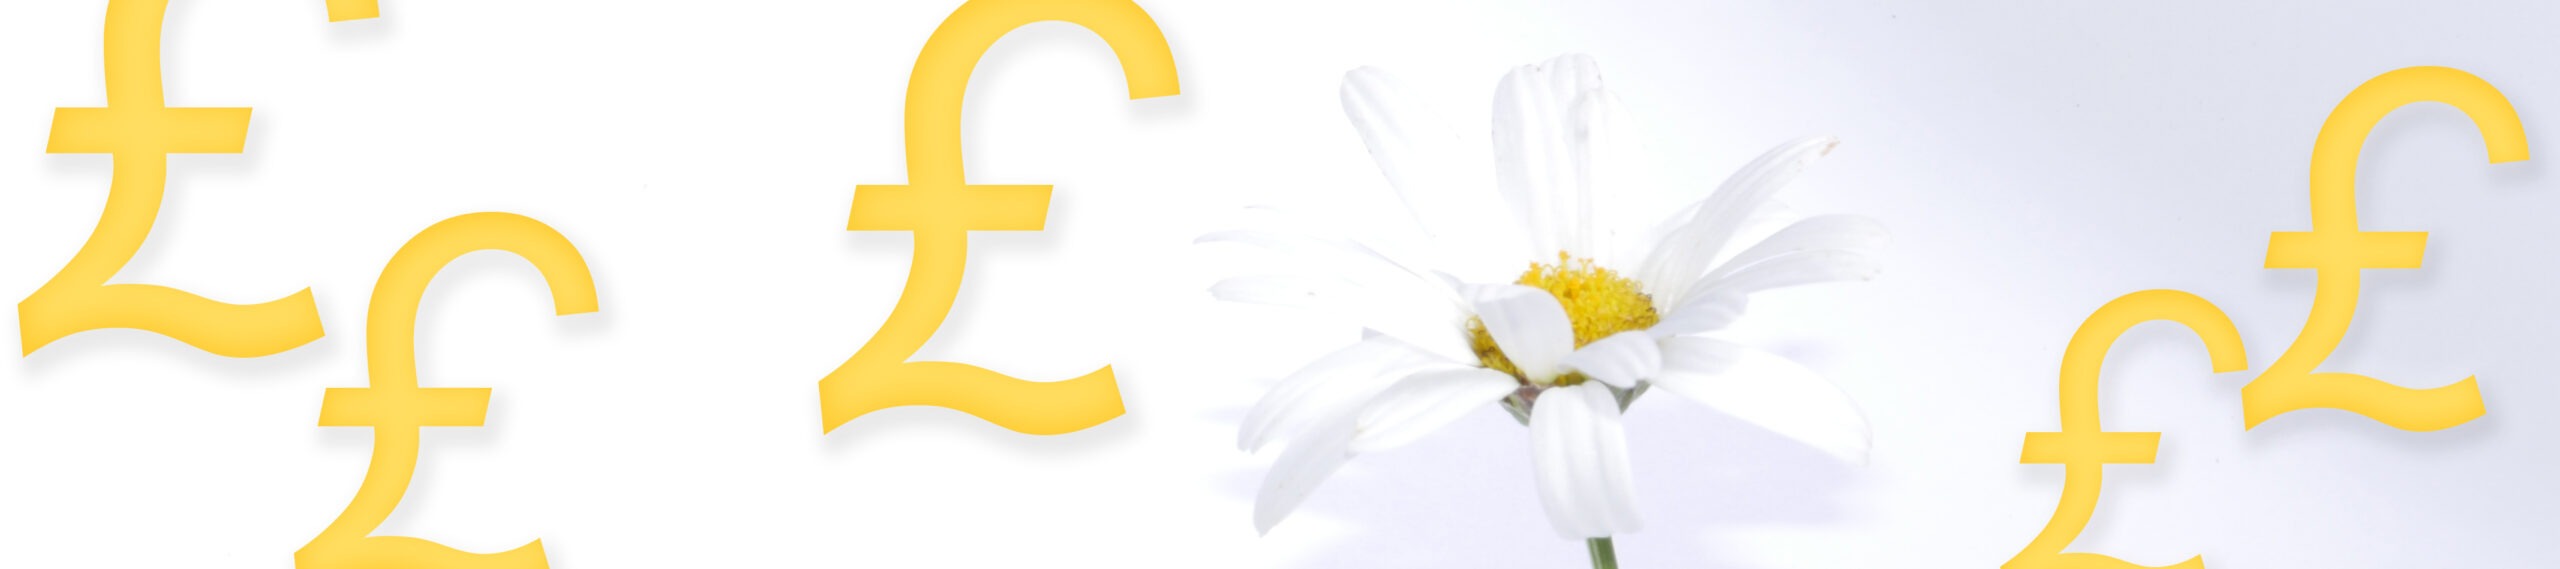 My prices for online and phone counselling at Daisy Vision Counselling